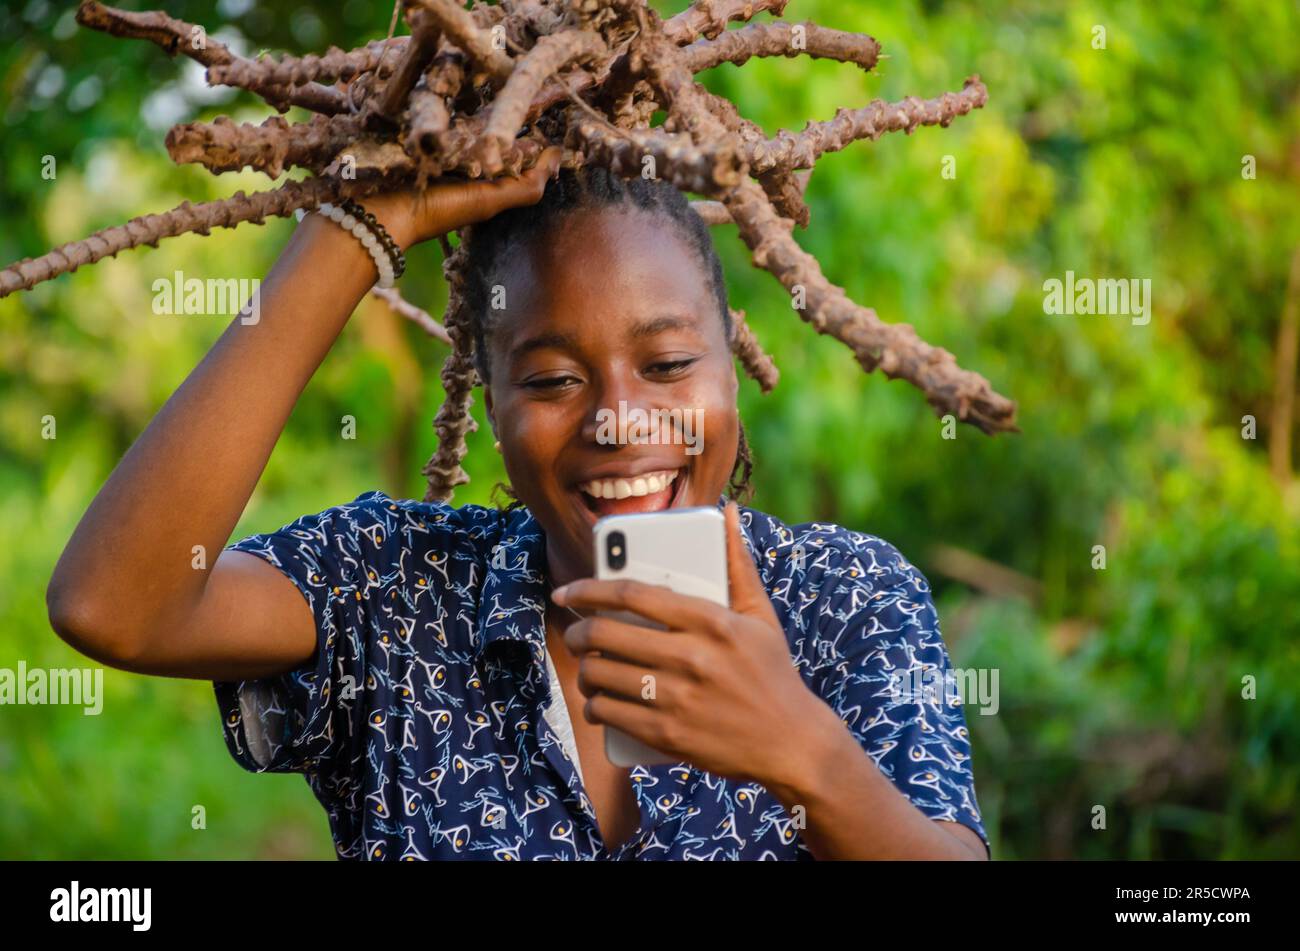 young African girl carrying wood and a and using her phone on a farm Stock Photo